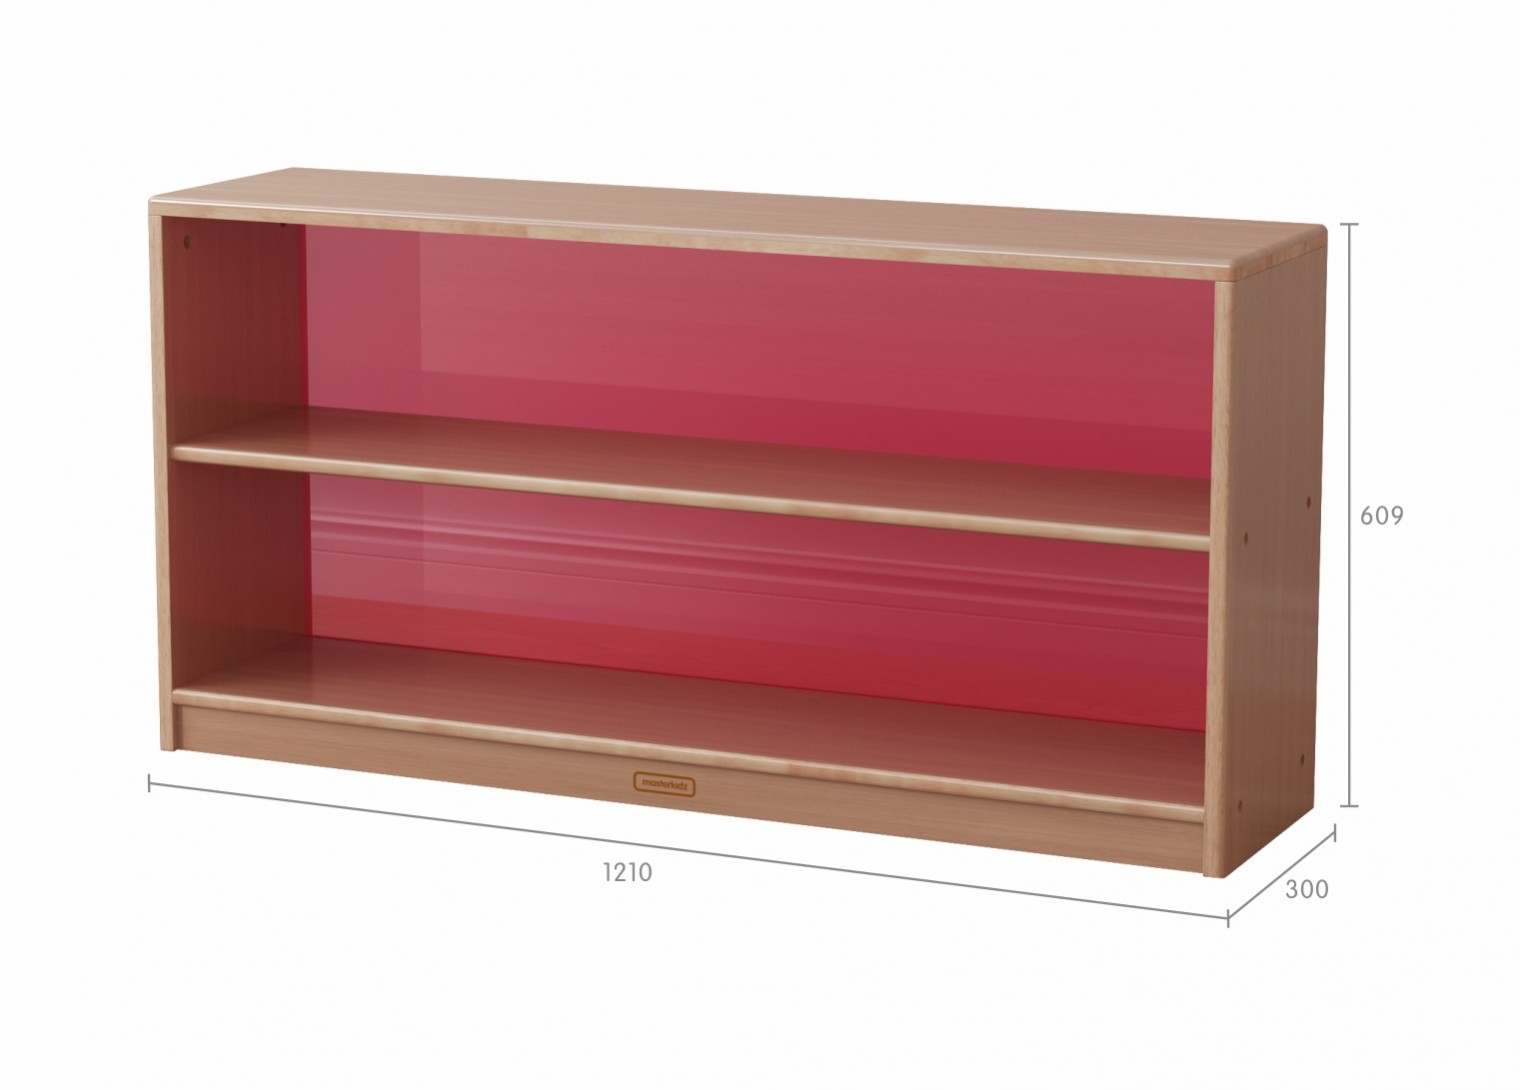 Forest School - 609H x 1210L Wooden  Shelving Unit - Translucent Red Back